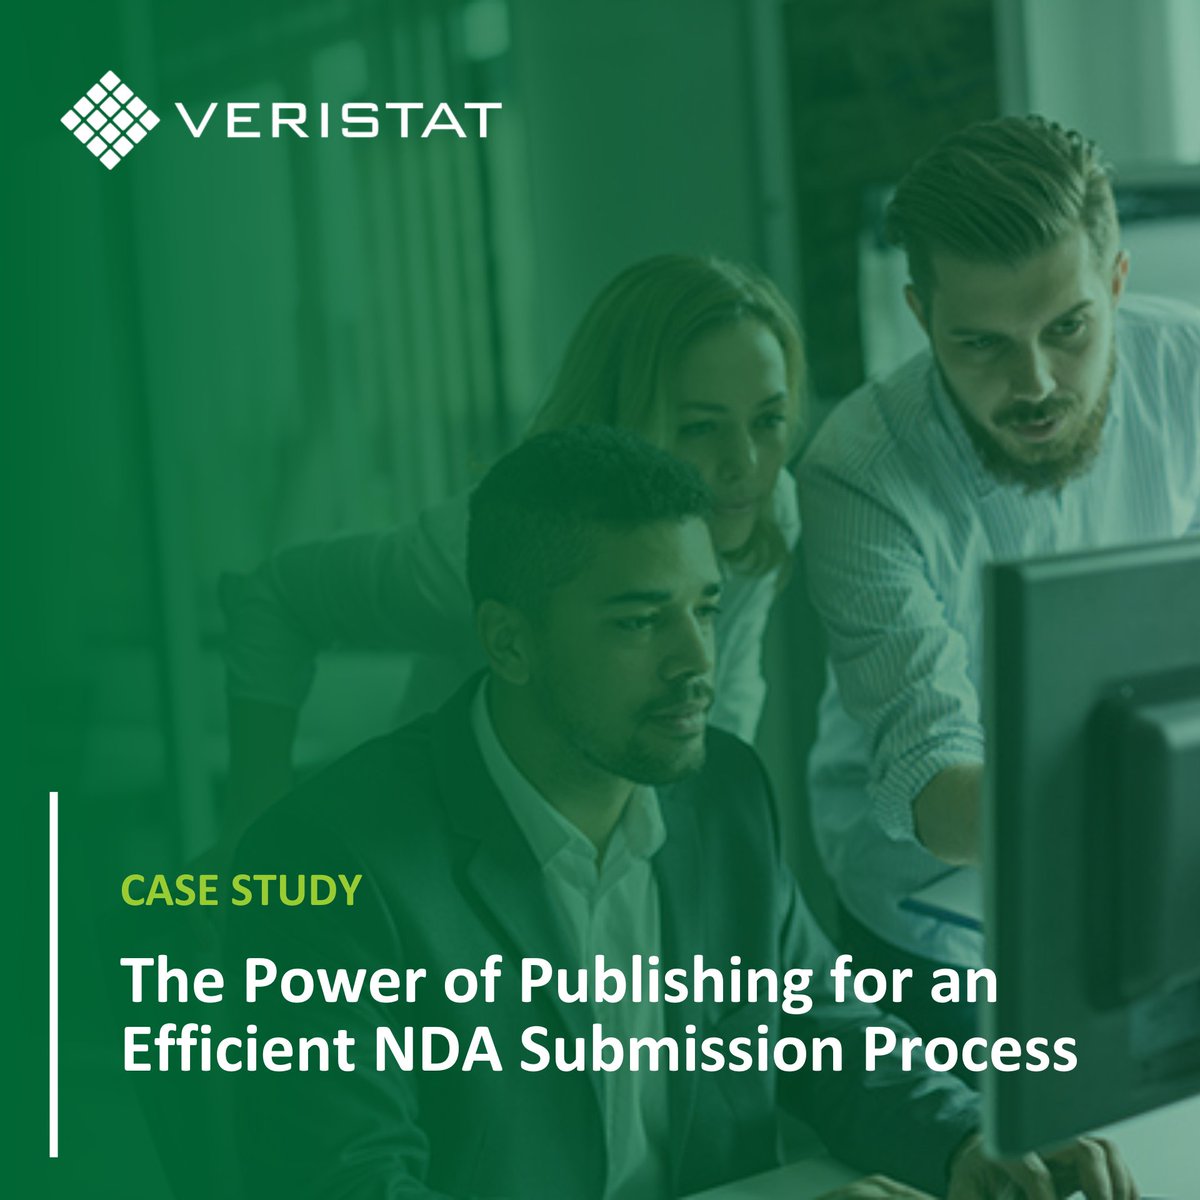 Want to design a seamless #NDApublishing process? Read our case study to discover the strategies and techniques that led to successful NDA publishing for one of our clients. 📩 Download now and take your NDA publishing process to the next level 👇 bit.ly/3JydcYY